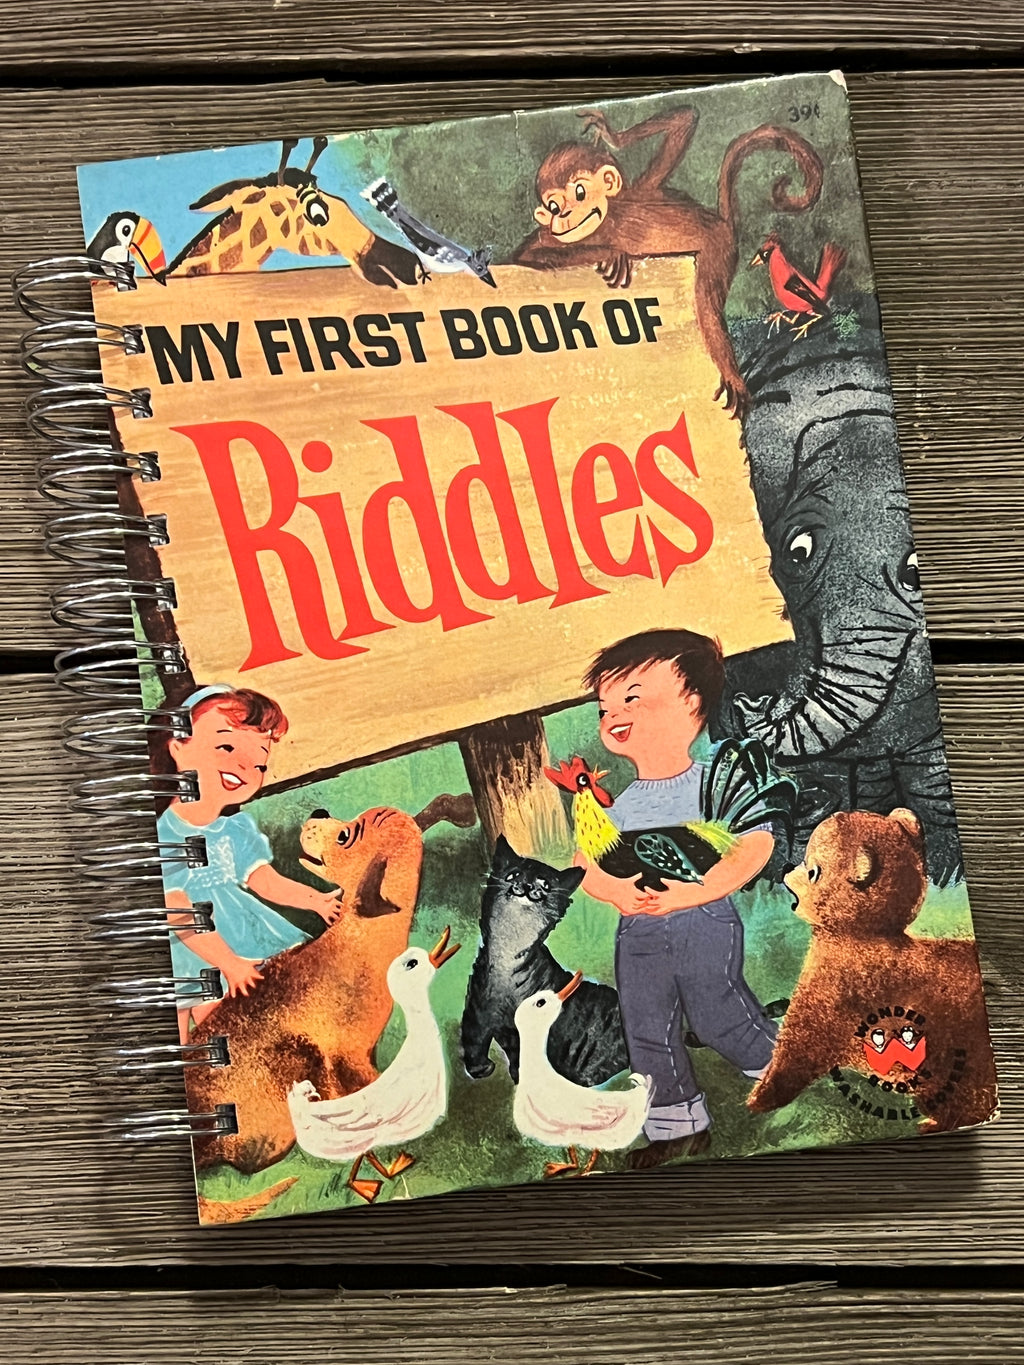 My First Book of Riddles